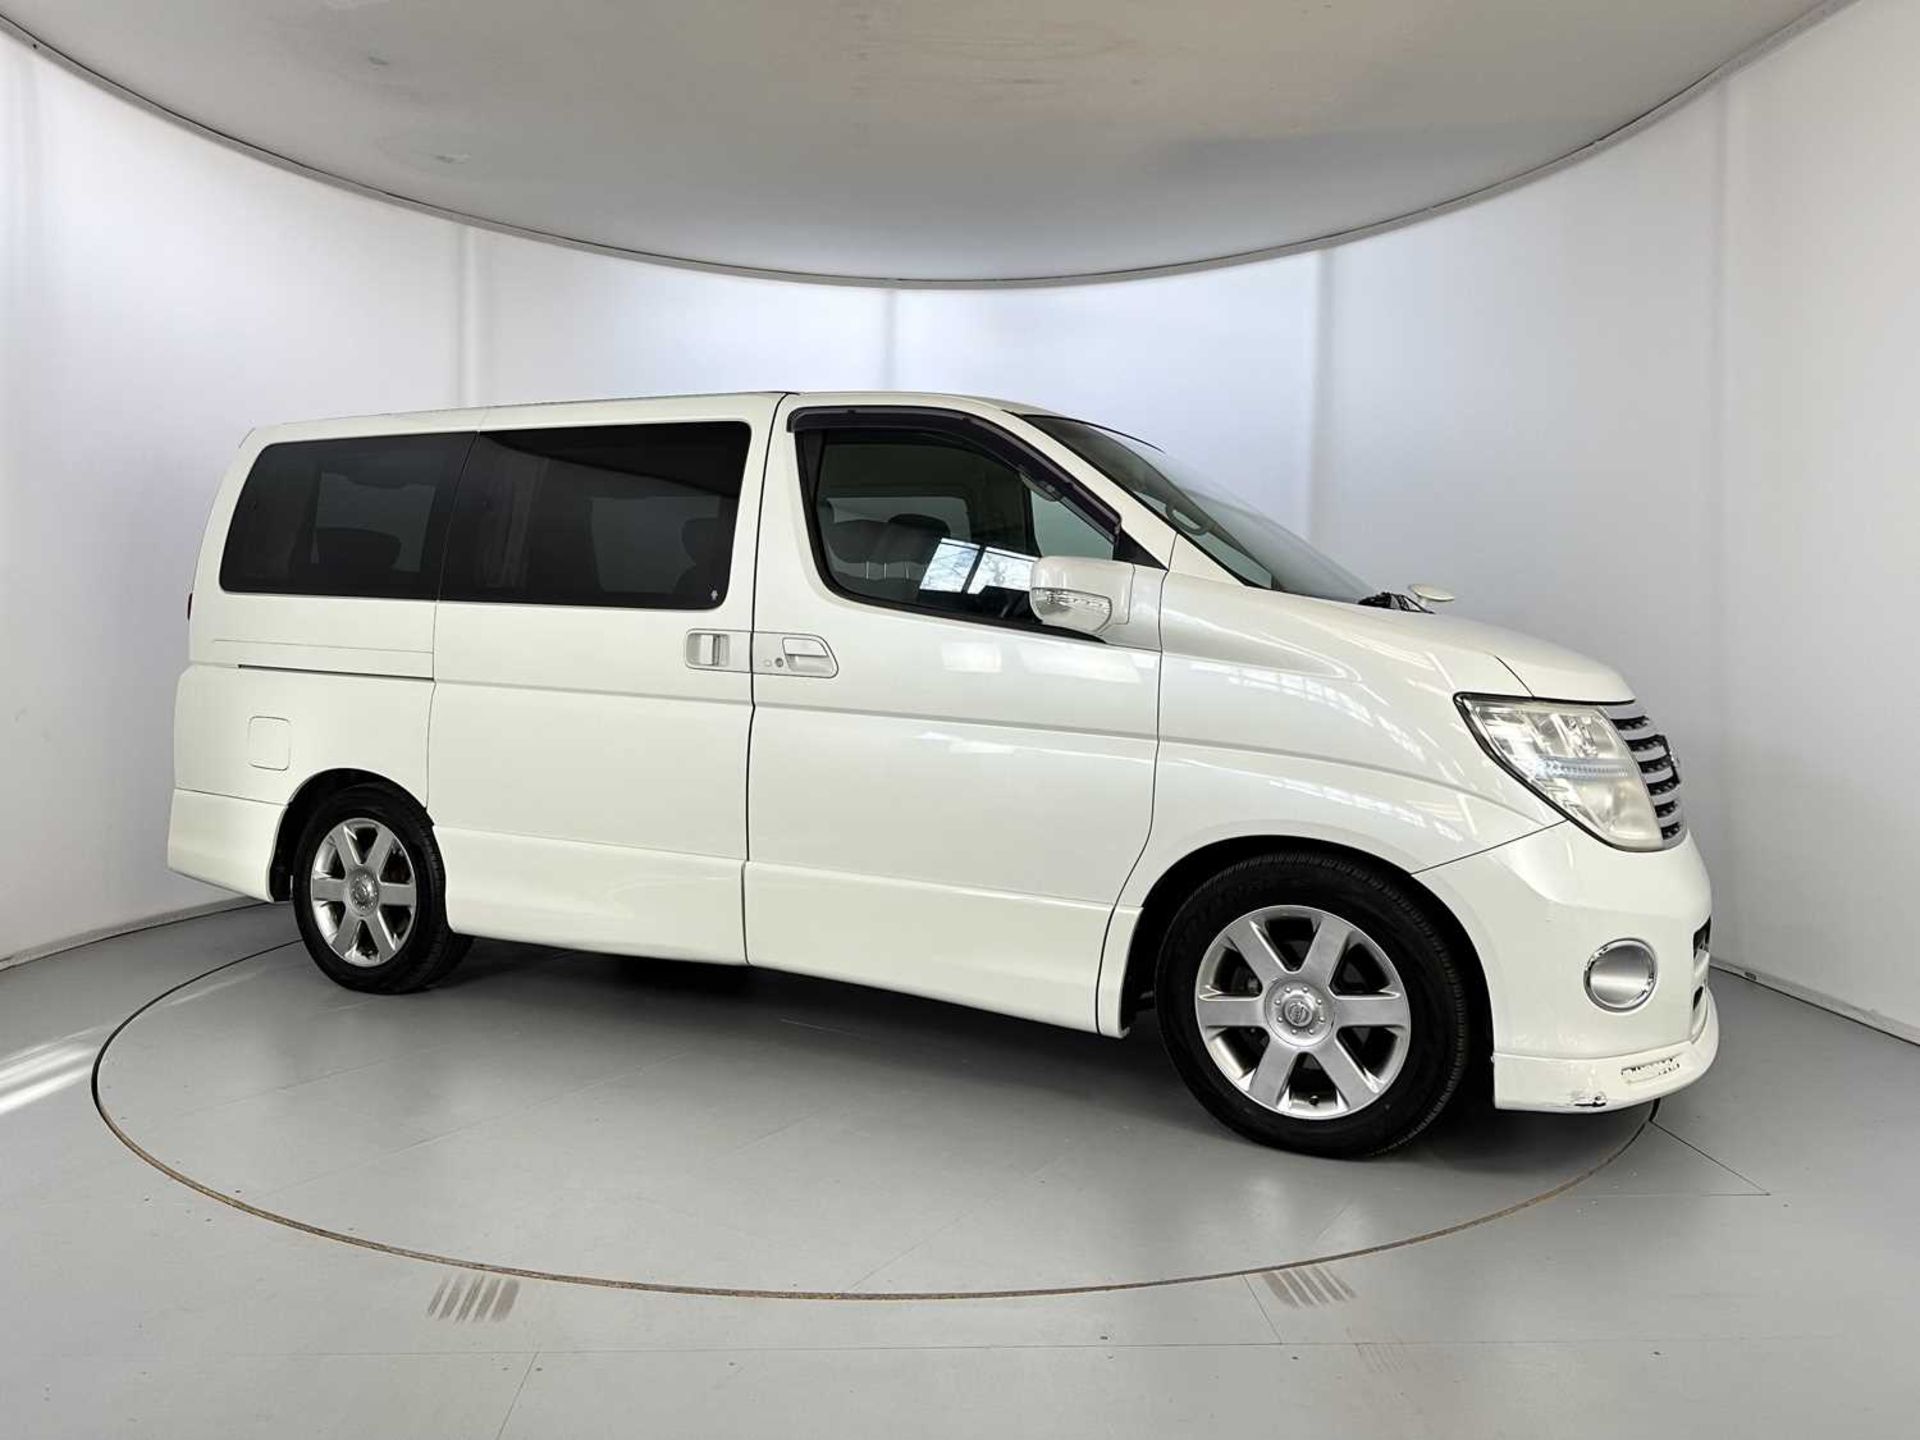 2007 Nissan Elgrand - Highway Star Edition 4WD - Image 12 of 39